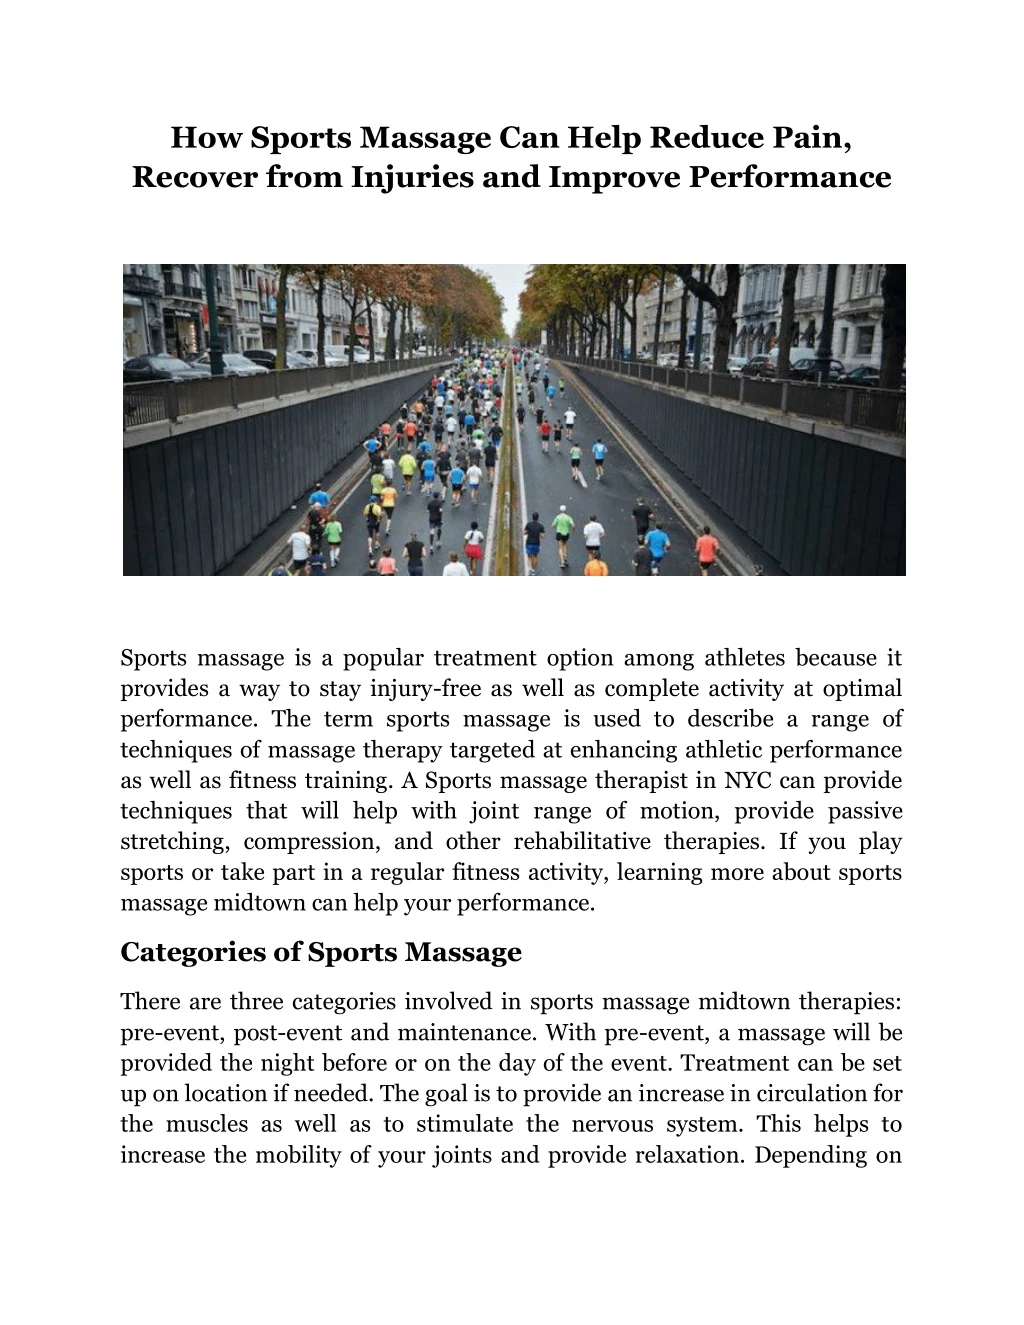 how sports massage can help reduce pain recover